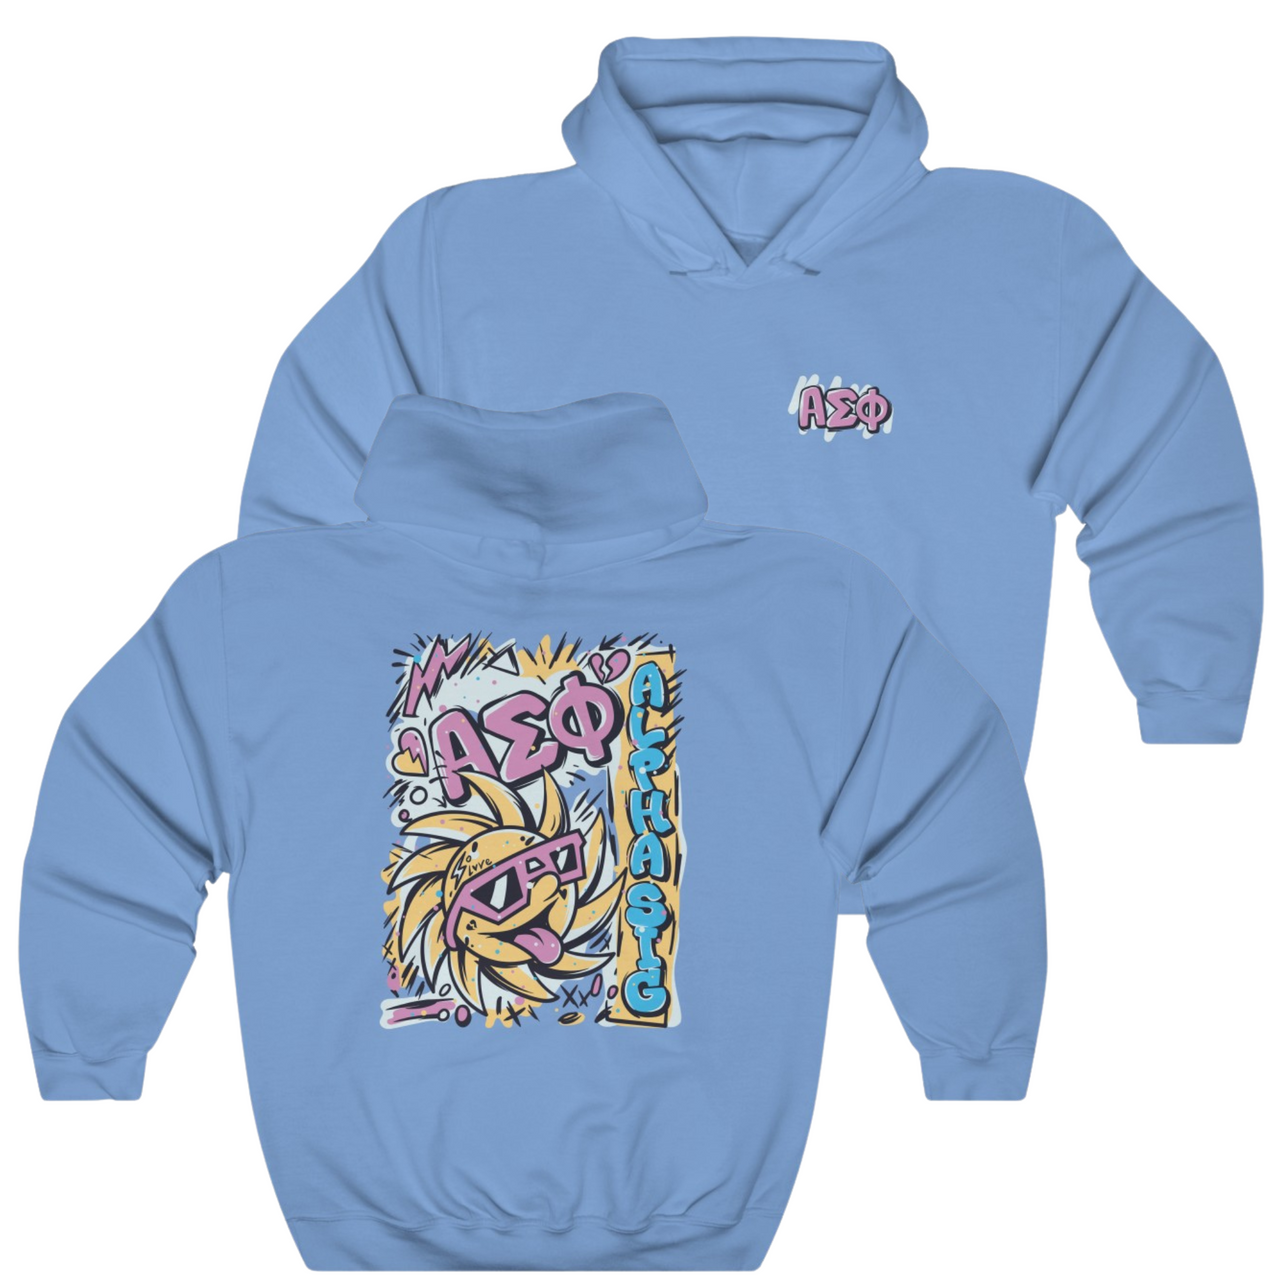 Blue Alpha Sigma Phi Graphic Hoodie | Fun in the Sun | Alpha Sigma Phi Fraternity 